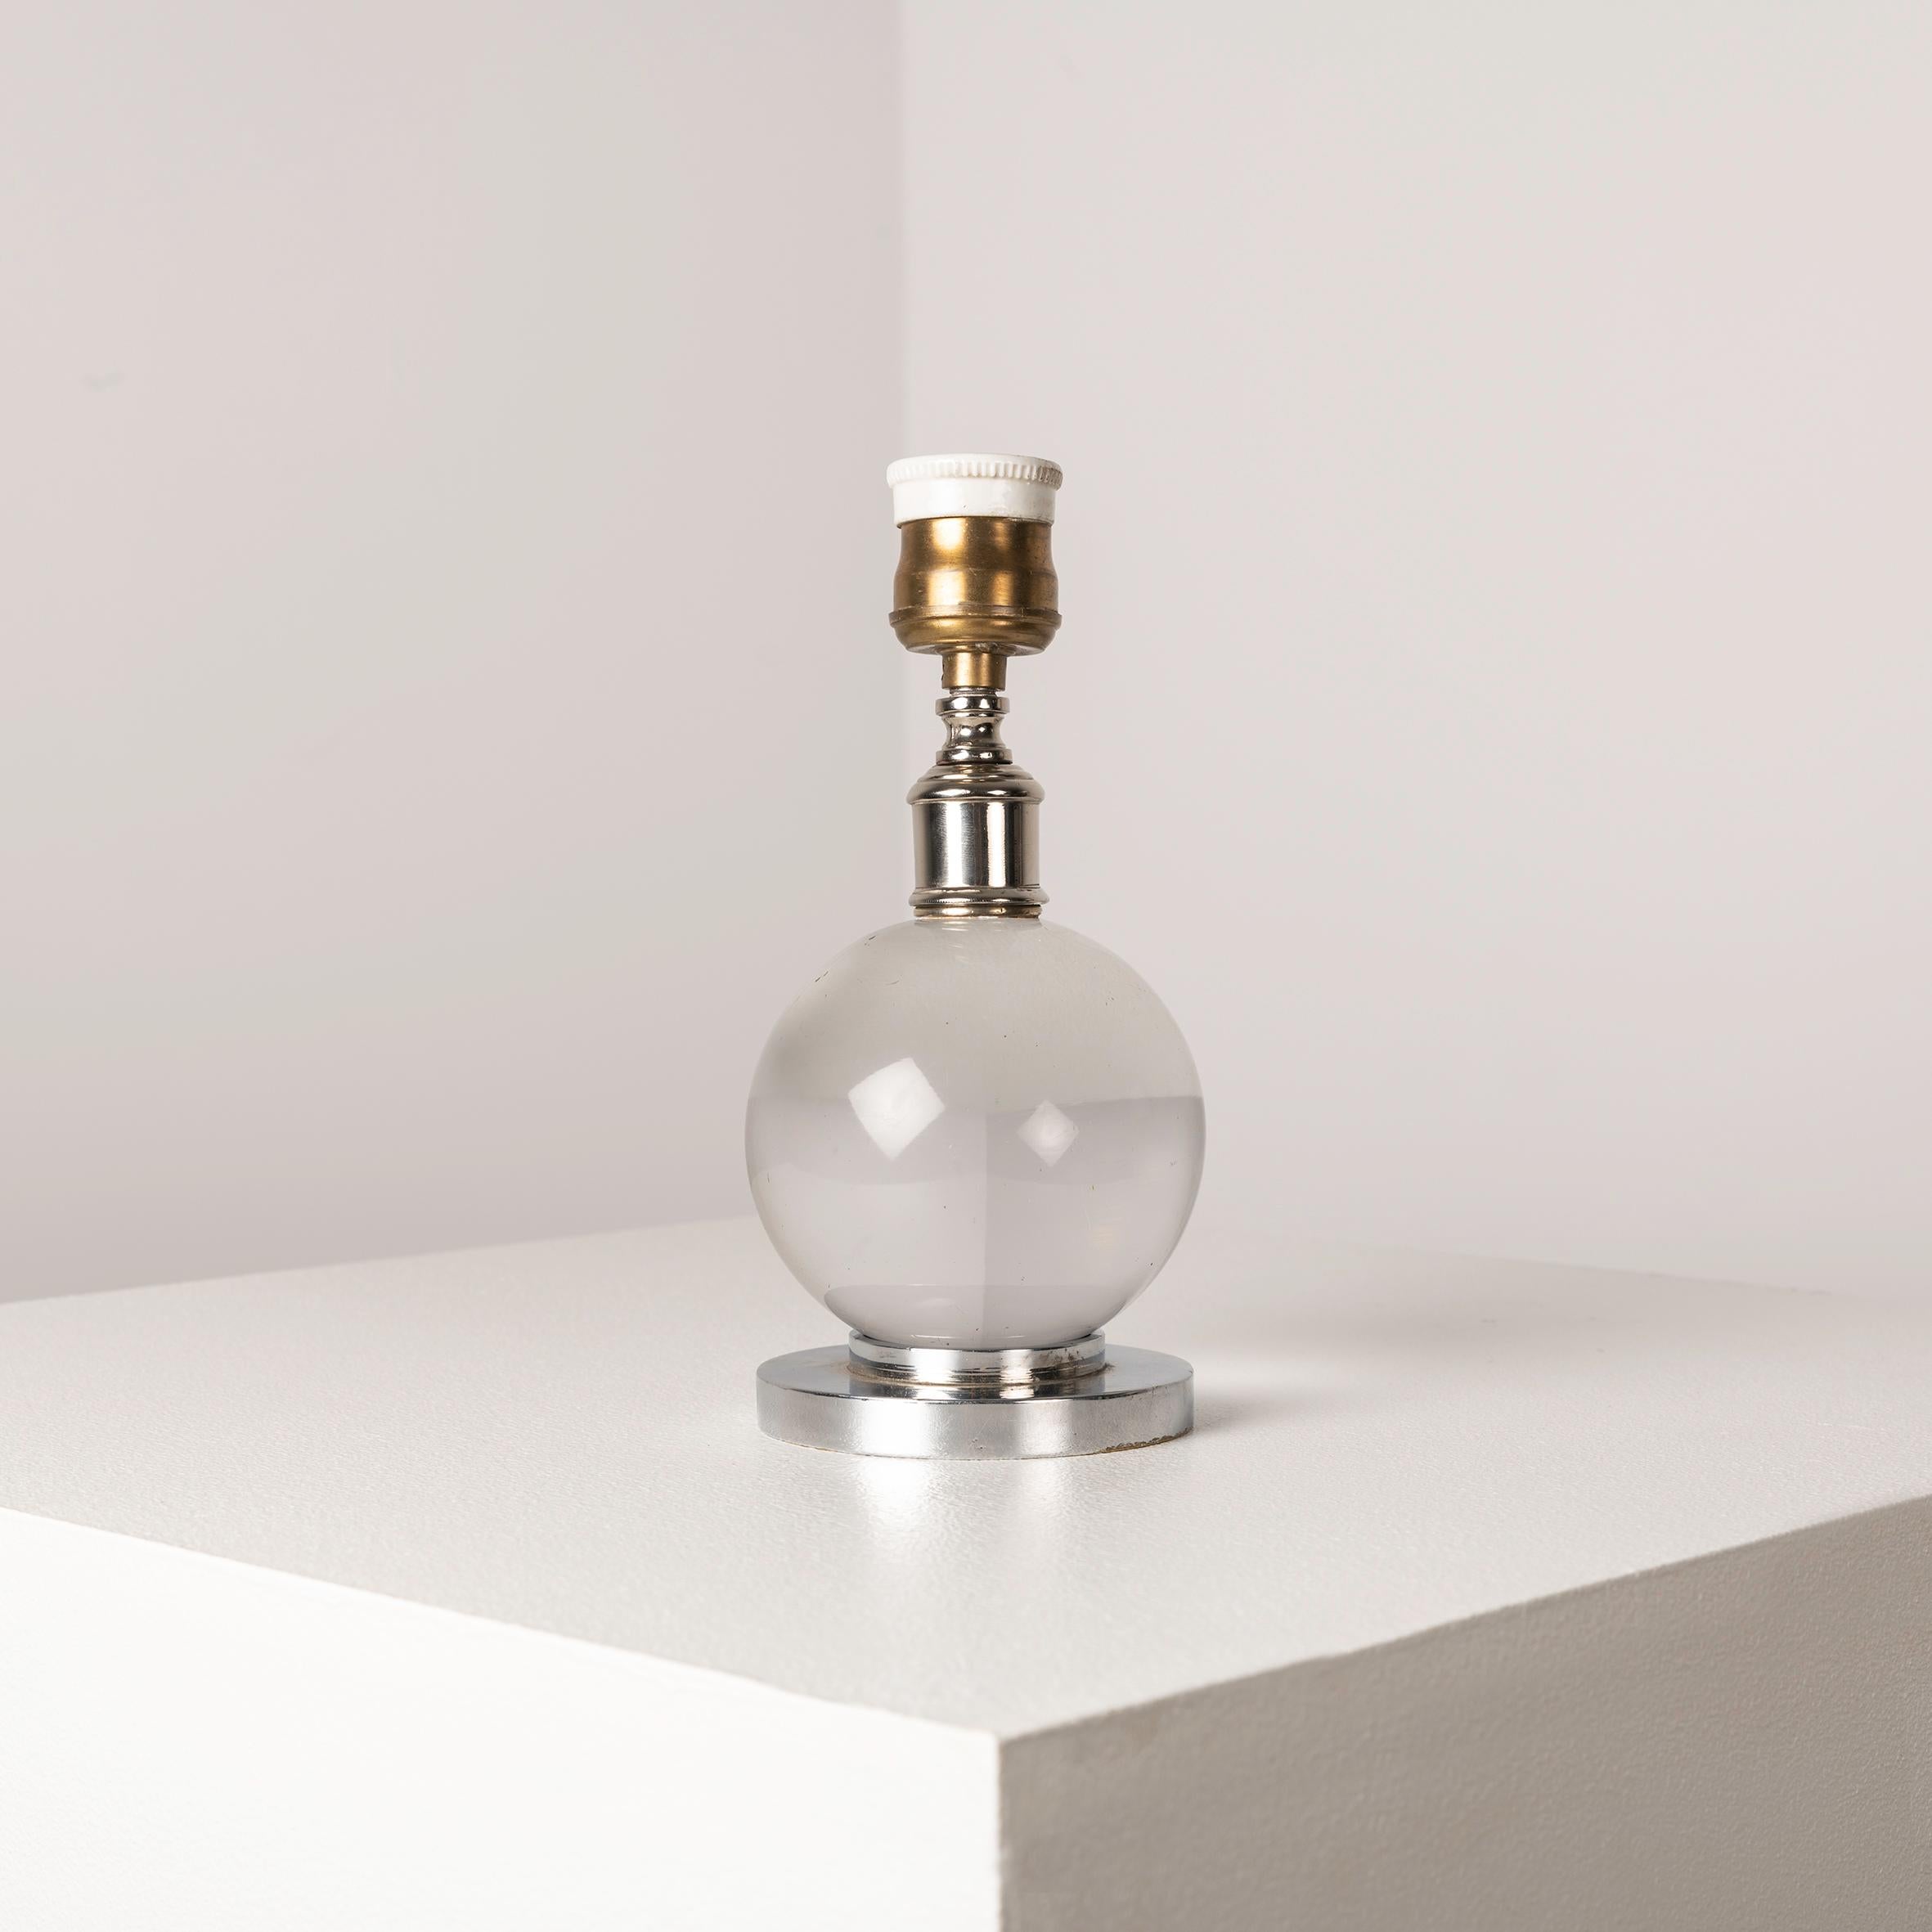 
ChatGPT
Behold the enchanting allure of Jacques Adnet's Art Deco crystal ball lamp for Baccarat, a sublime symphony of design and luxury. Adnet's ingenuity is evident in the lamp's ethereal sphere, crafted with precision and adorned with Baccarat's